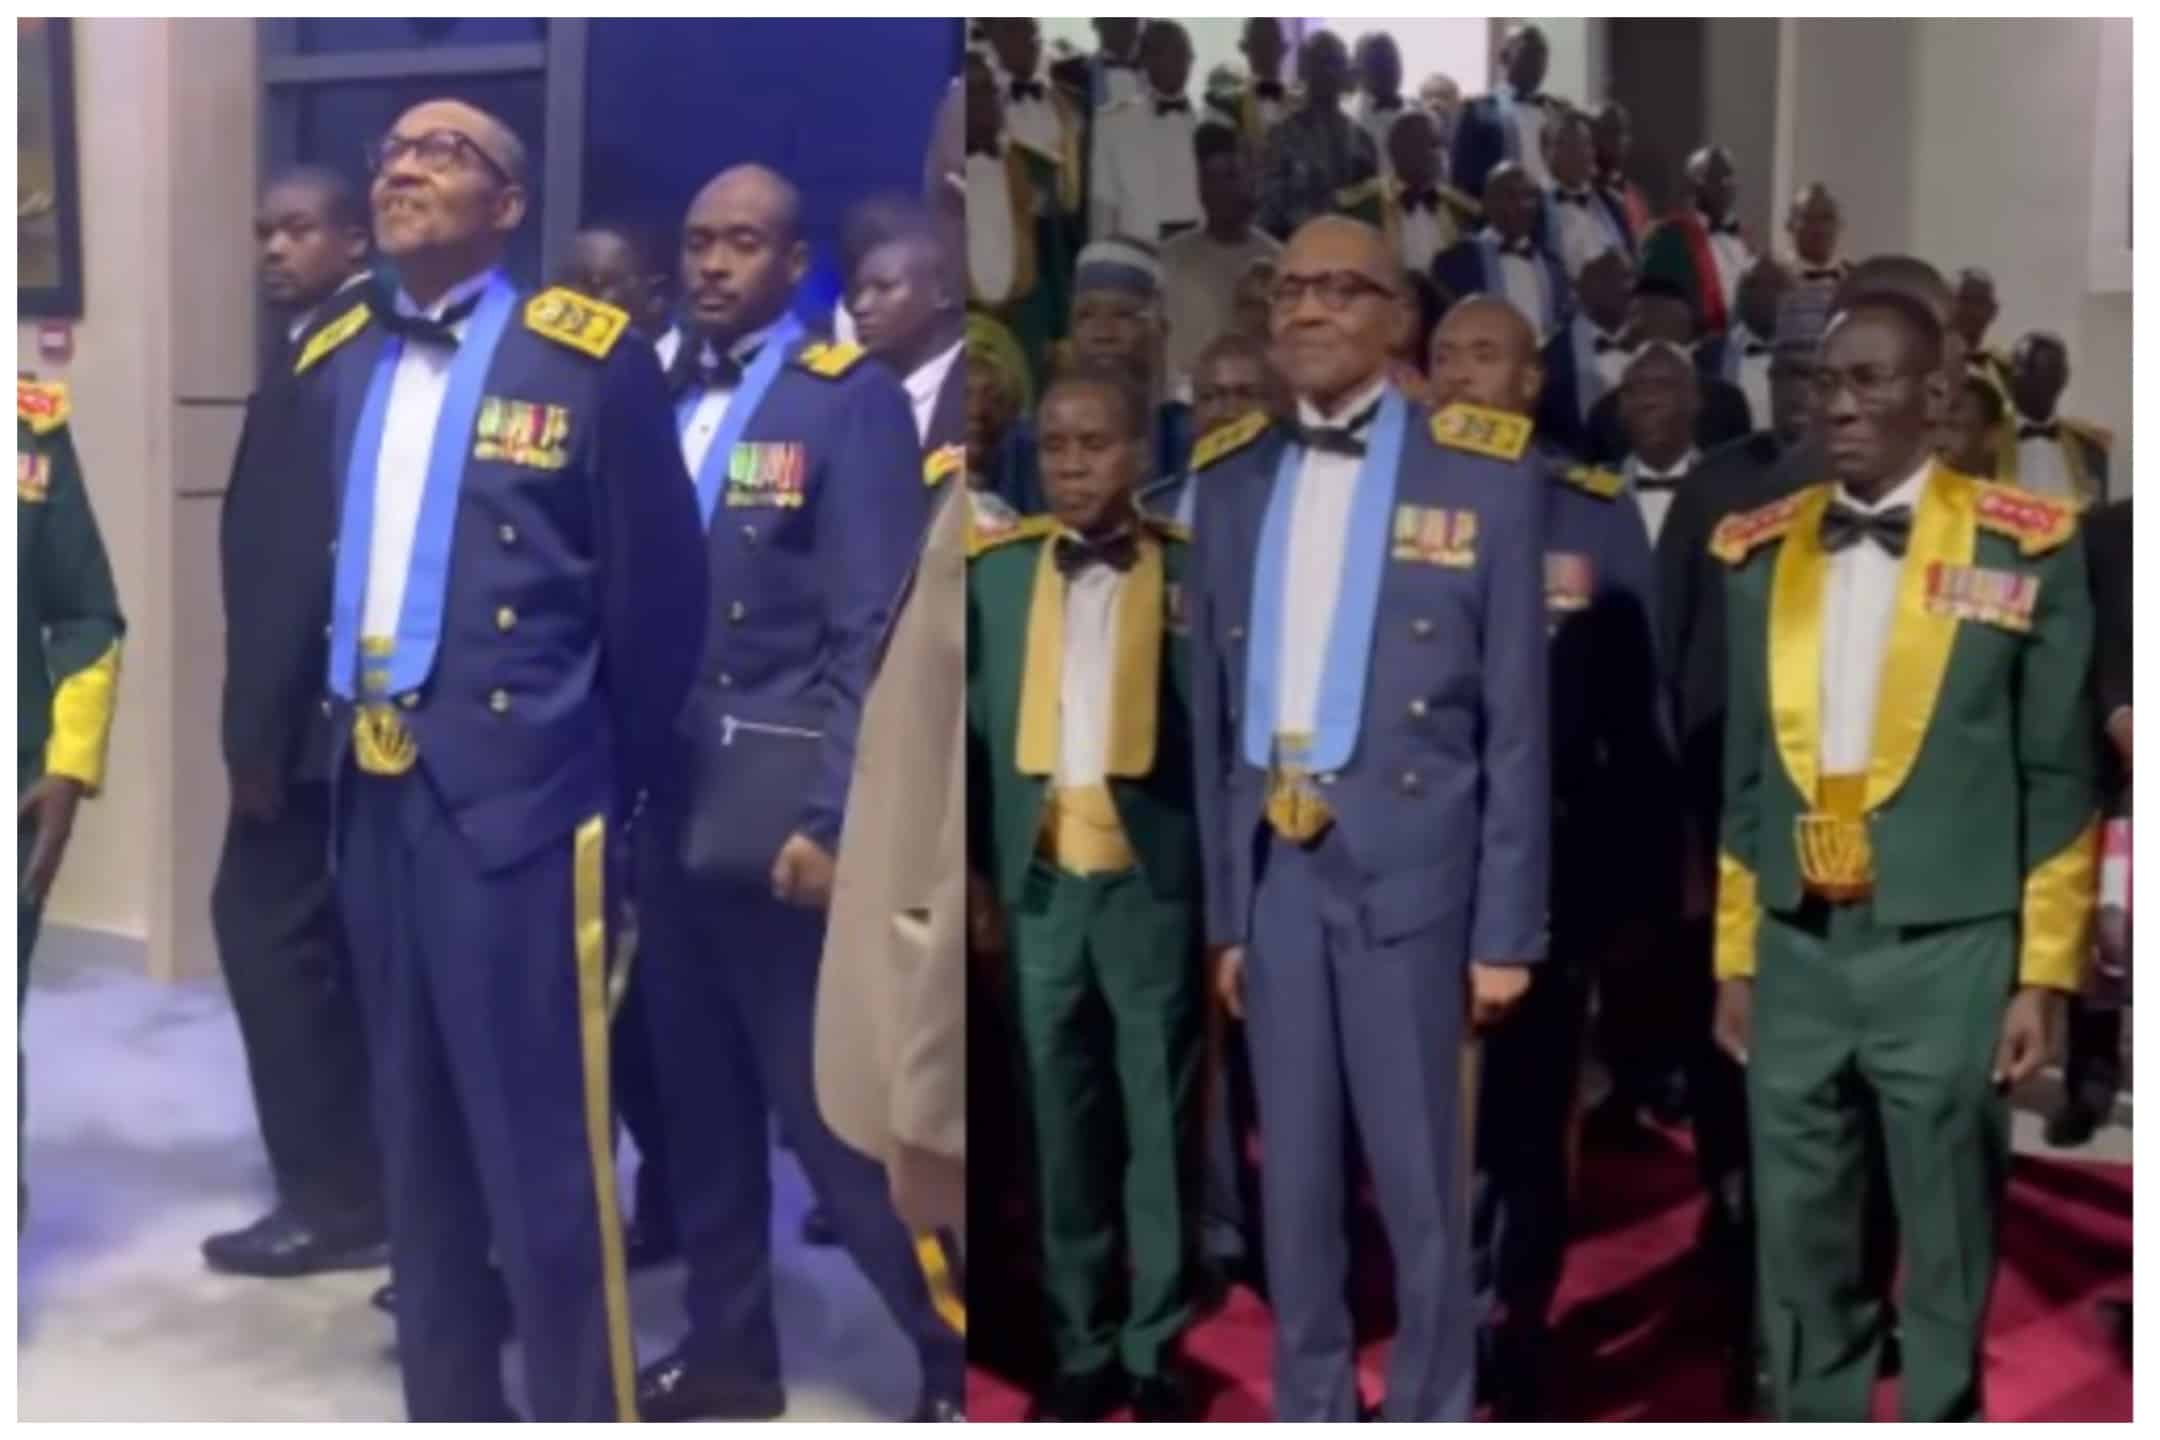 President Buhari’s Air Force Attire Creates Buzz and Divides Opinion among Nigerians